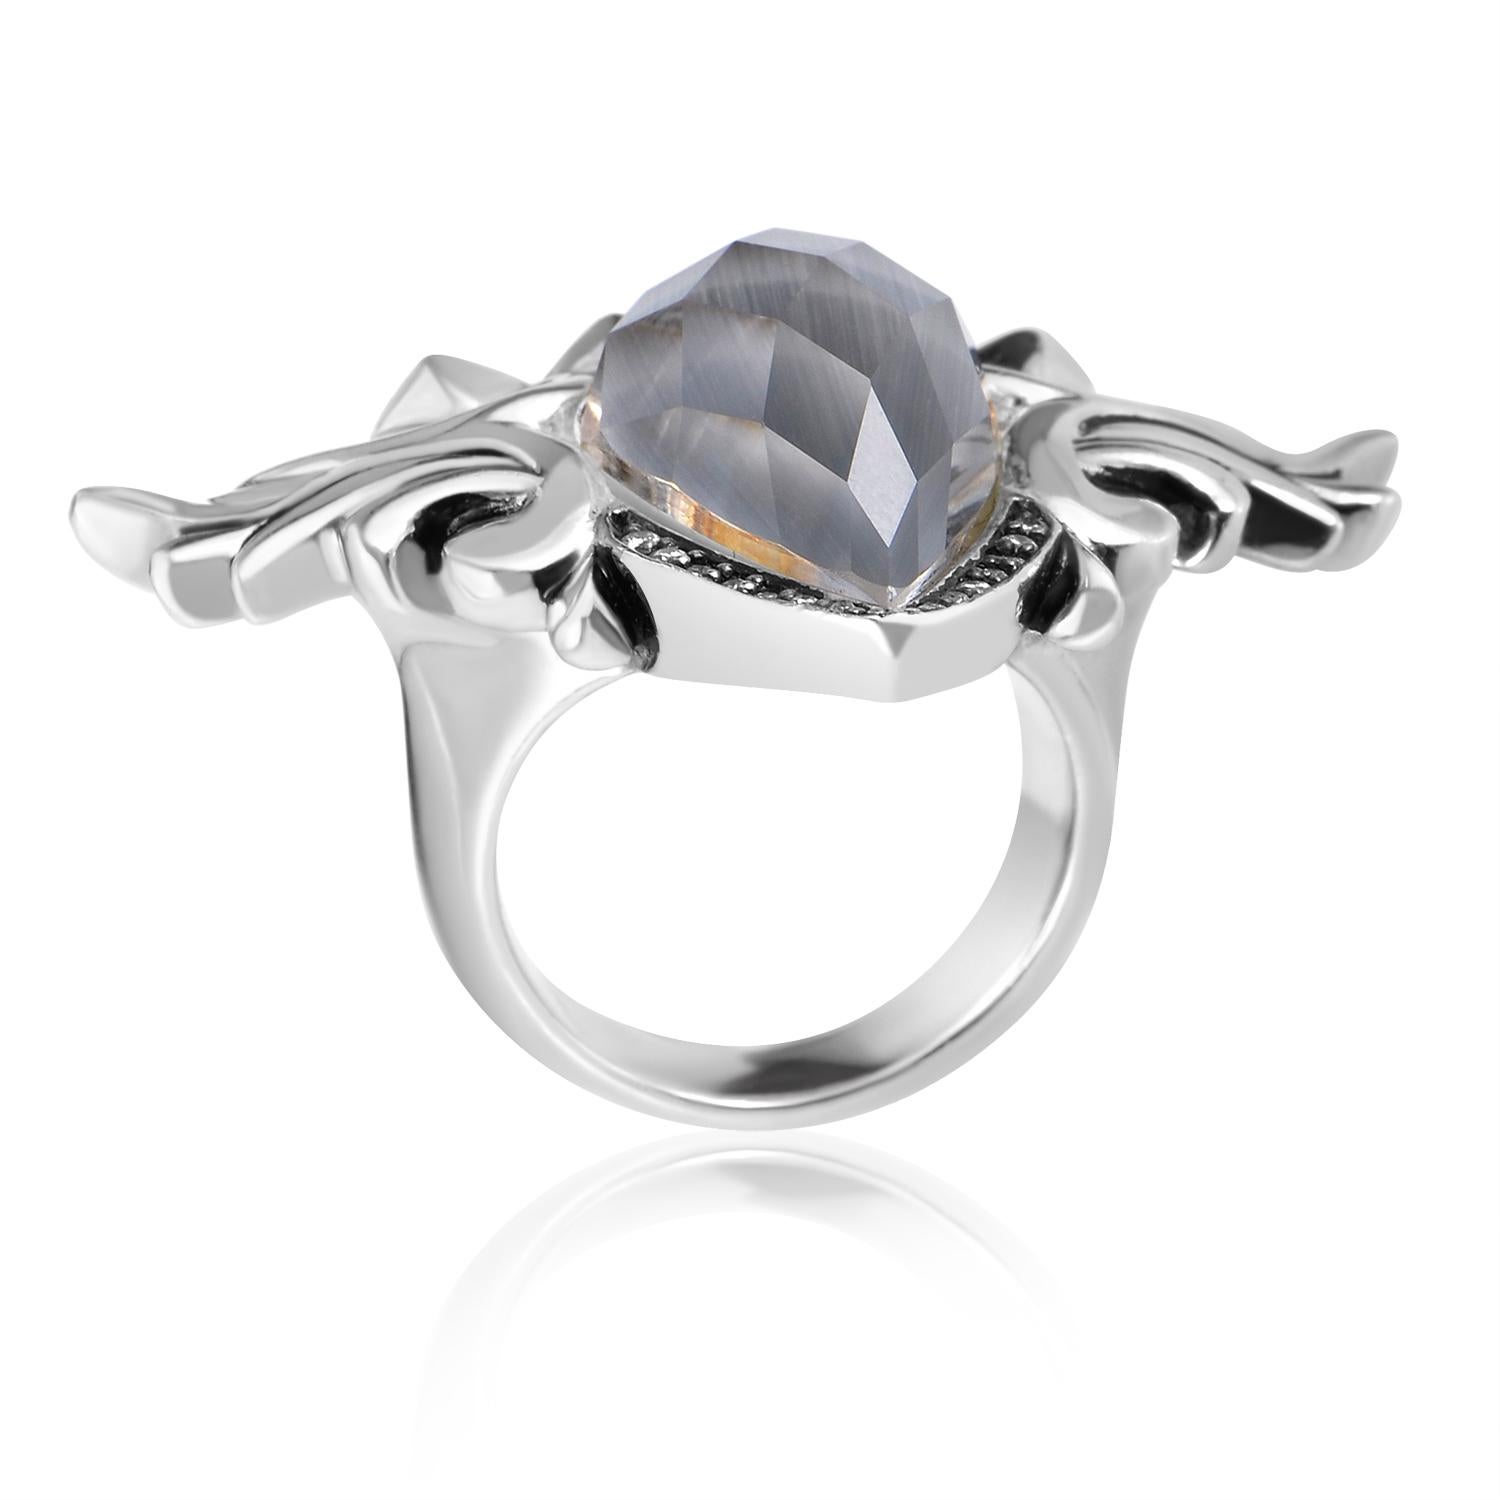 A quintessential piece from the highly revered “Superstud” collection, this outstanding ring offers a splendidly fashionable look. The ring is designed by Stephen Webster, and it is made of wonderfully shaped and immaculately crafted sterling